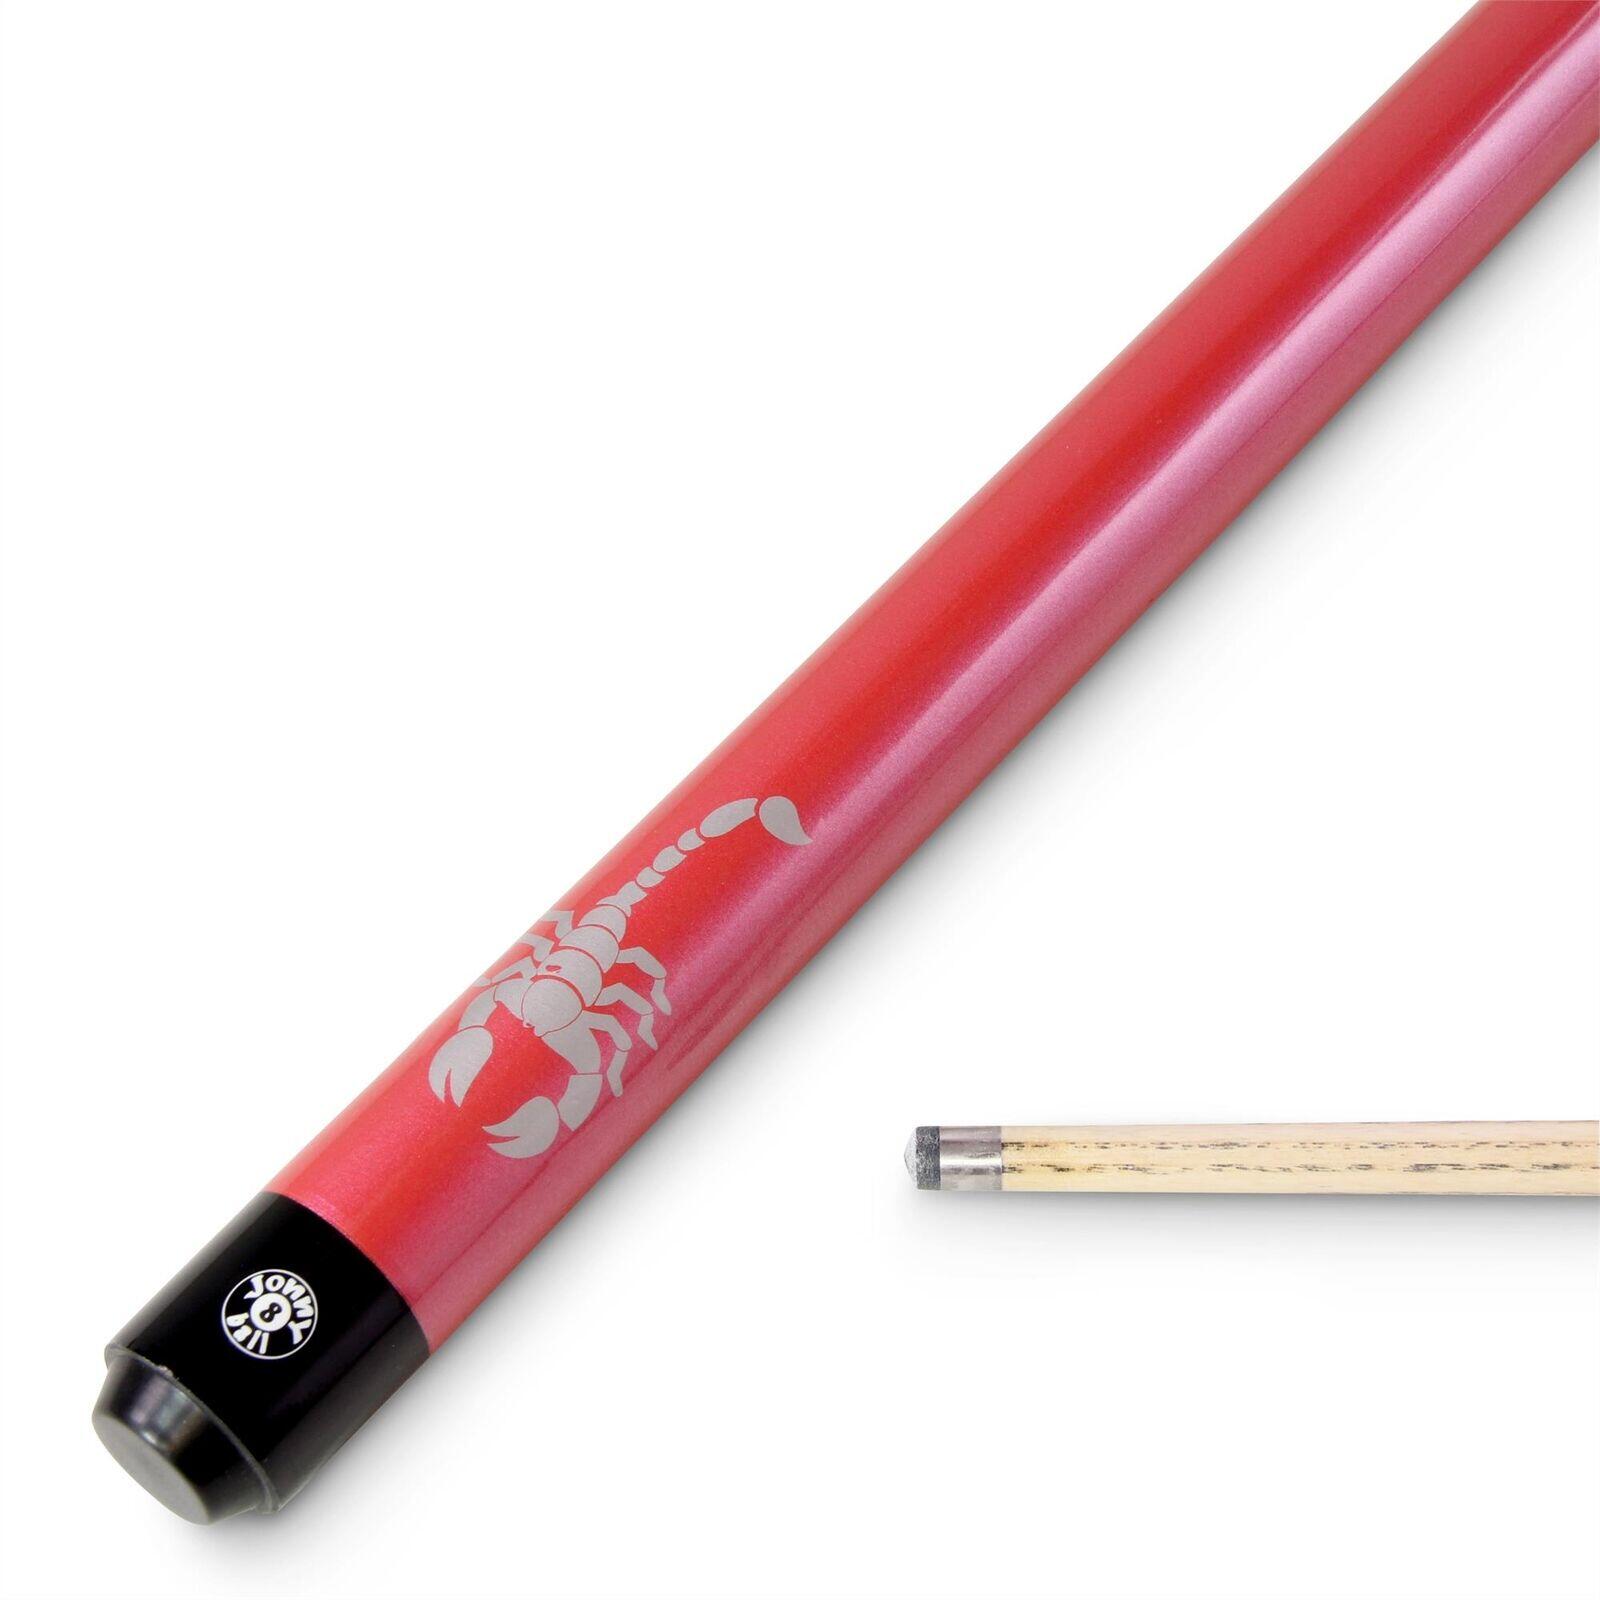 Jonny 8 Ball PINK SCORPION 2pc Centre Joint Ash Snooker Pool Cue with 9mm Tip 1/5